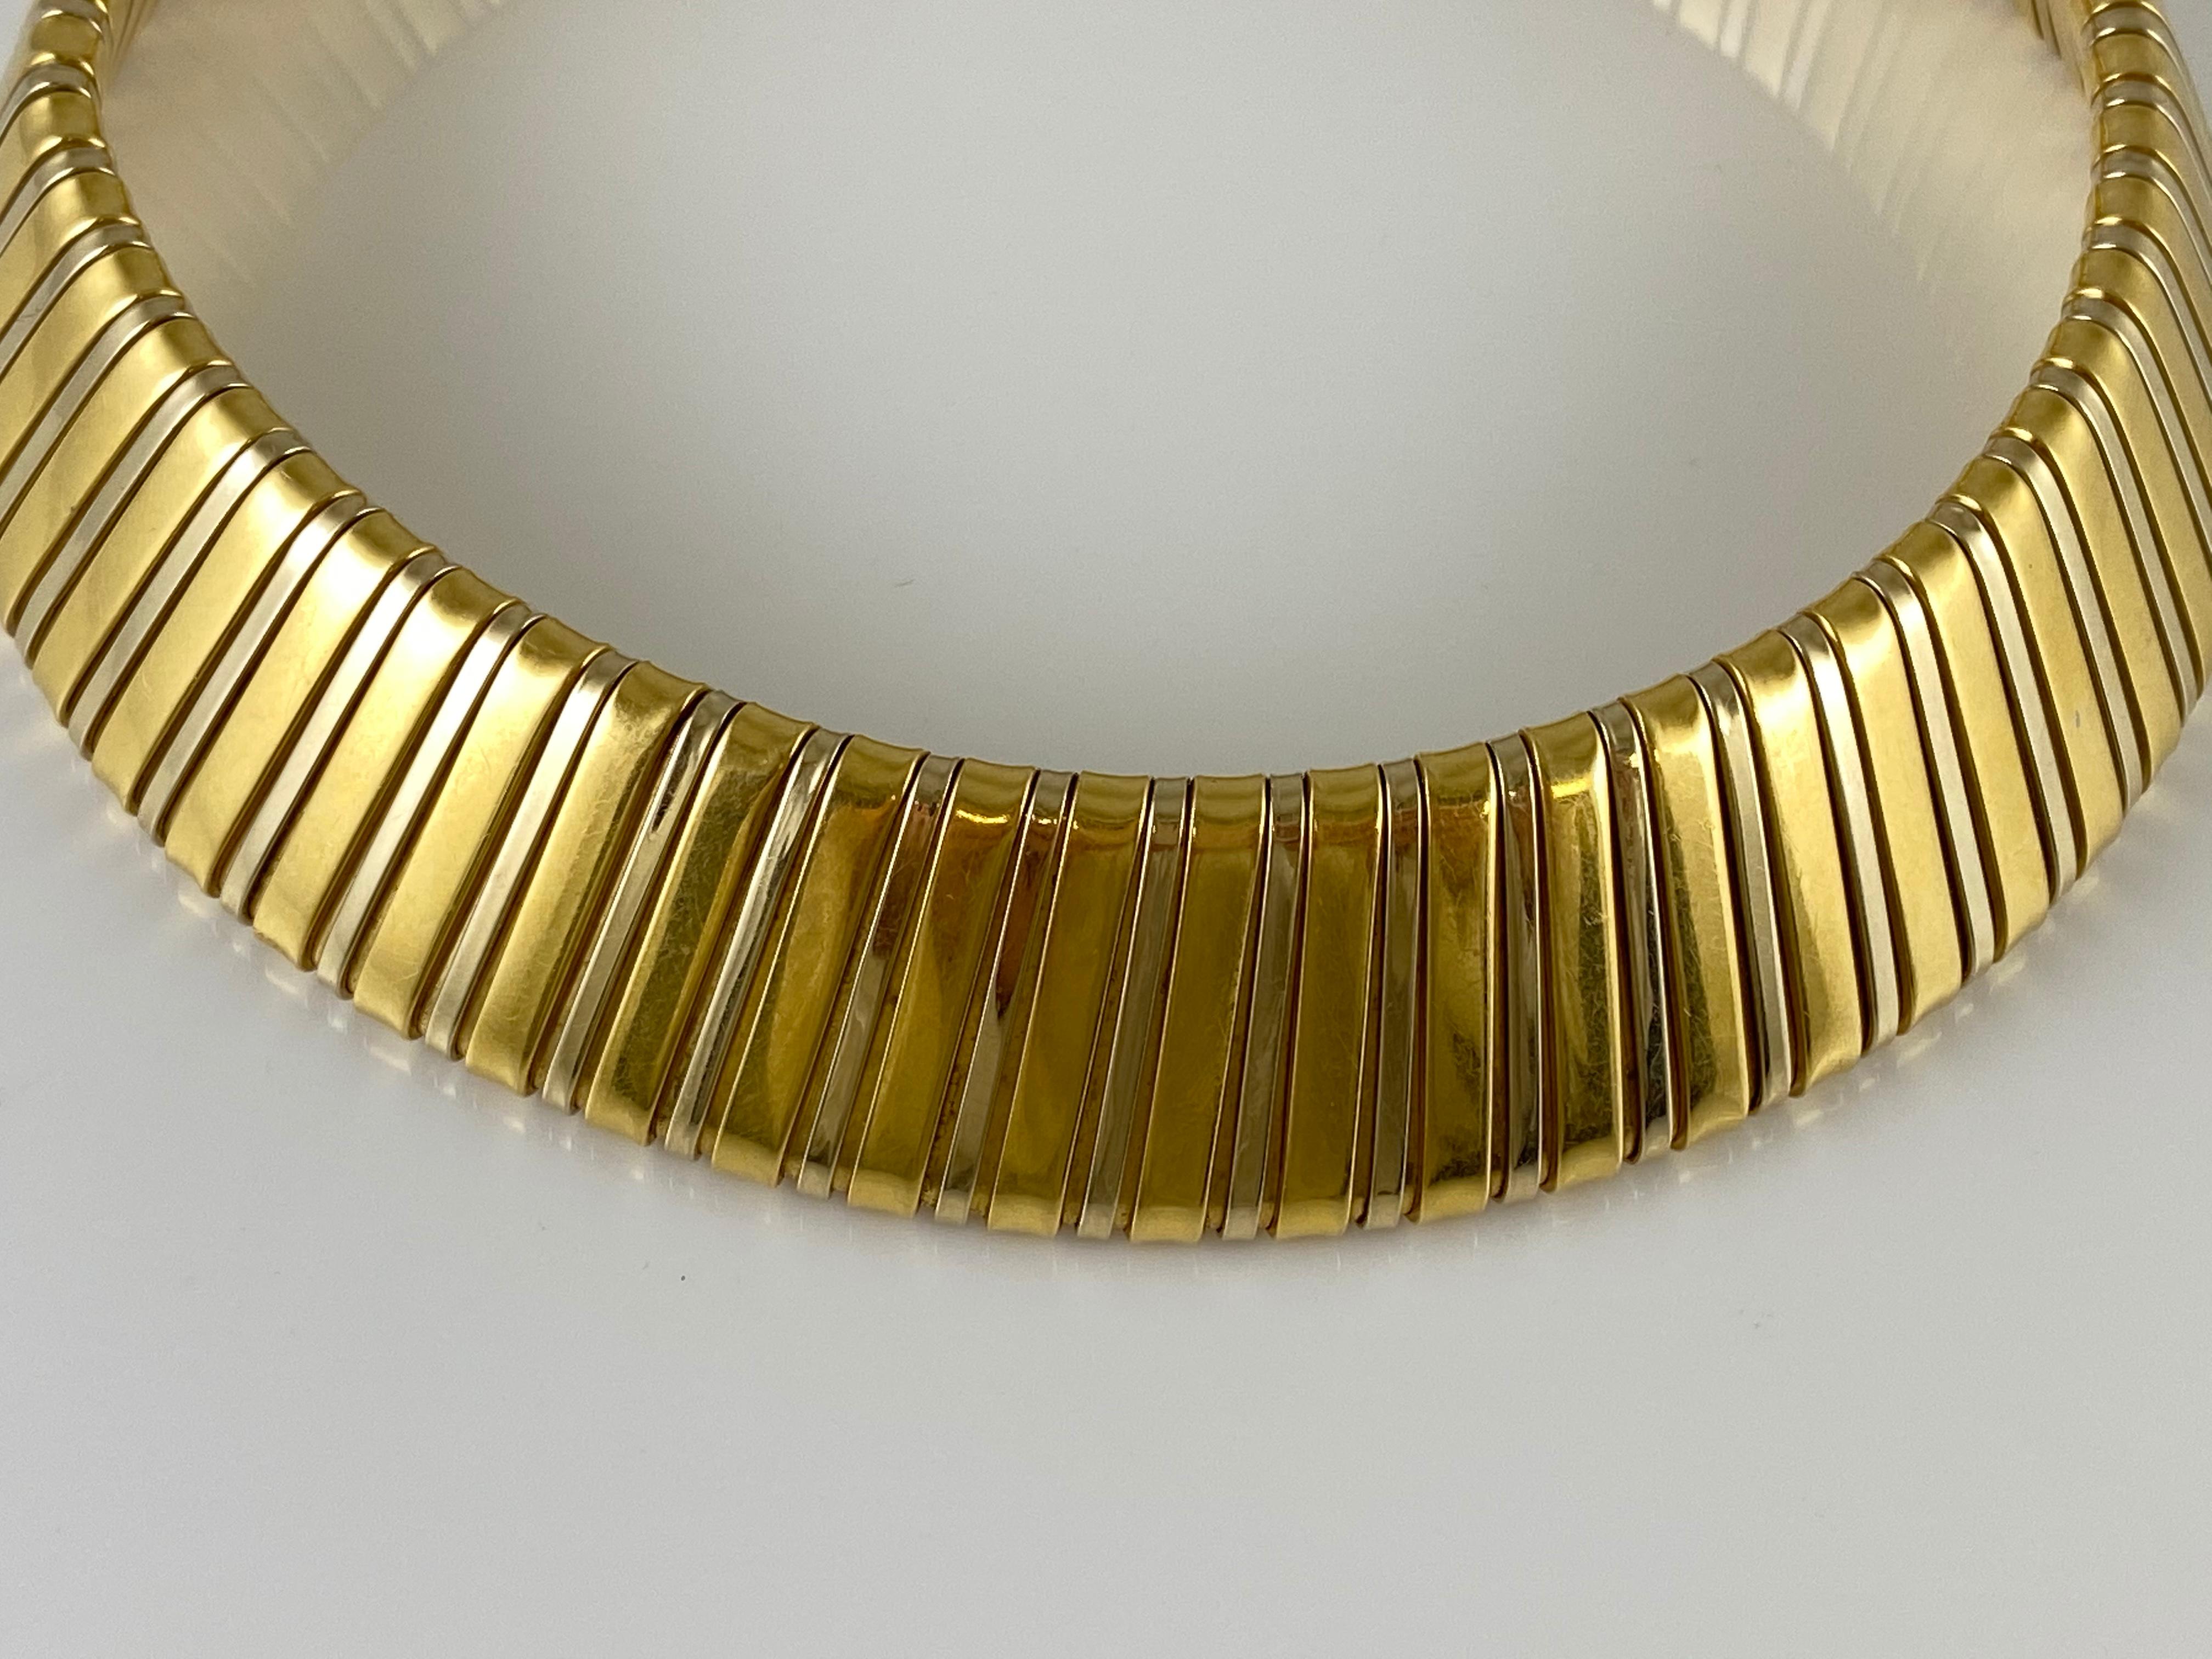 The neckalce is finely crafted in 18k yellow gold and weighing approximately total of 82.1 DWT.
Length: 16.5 Dwt.